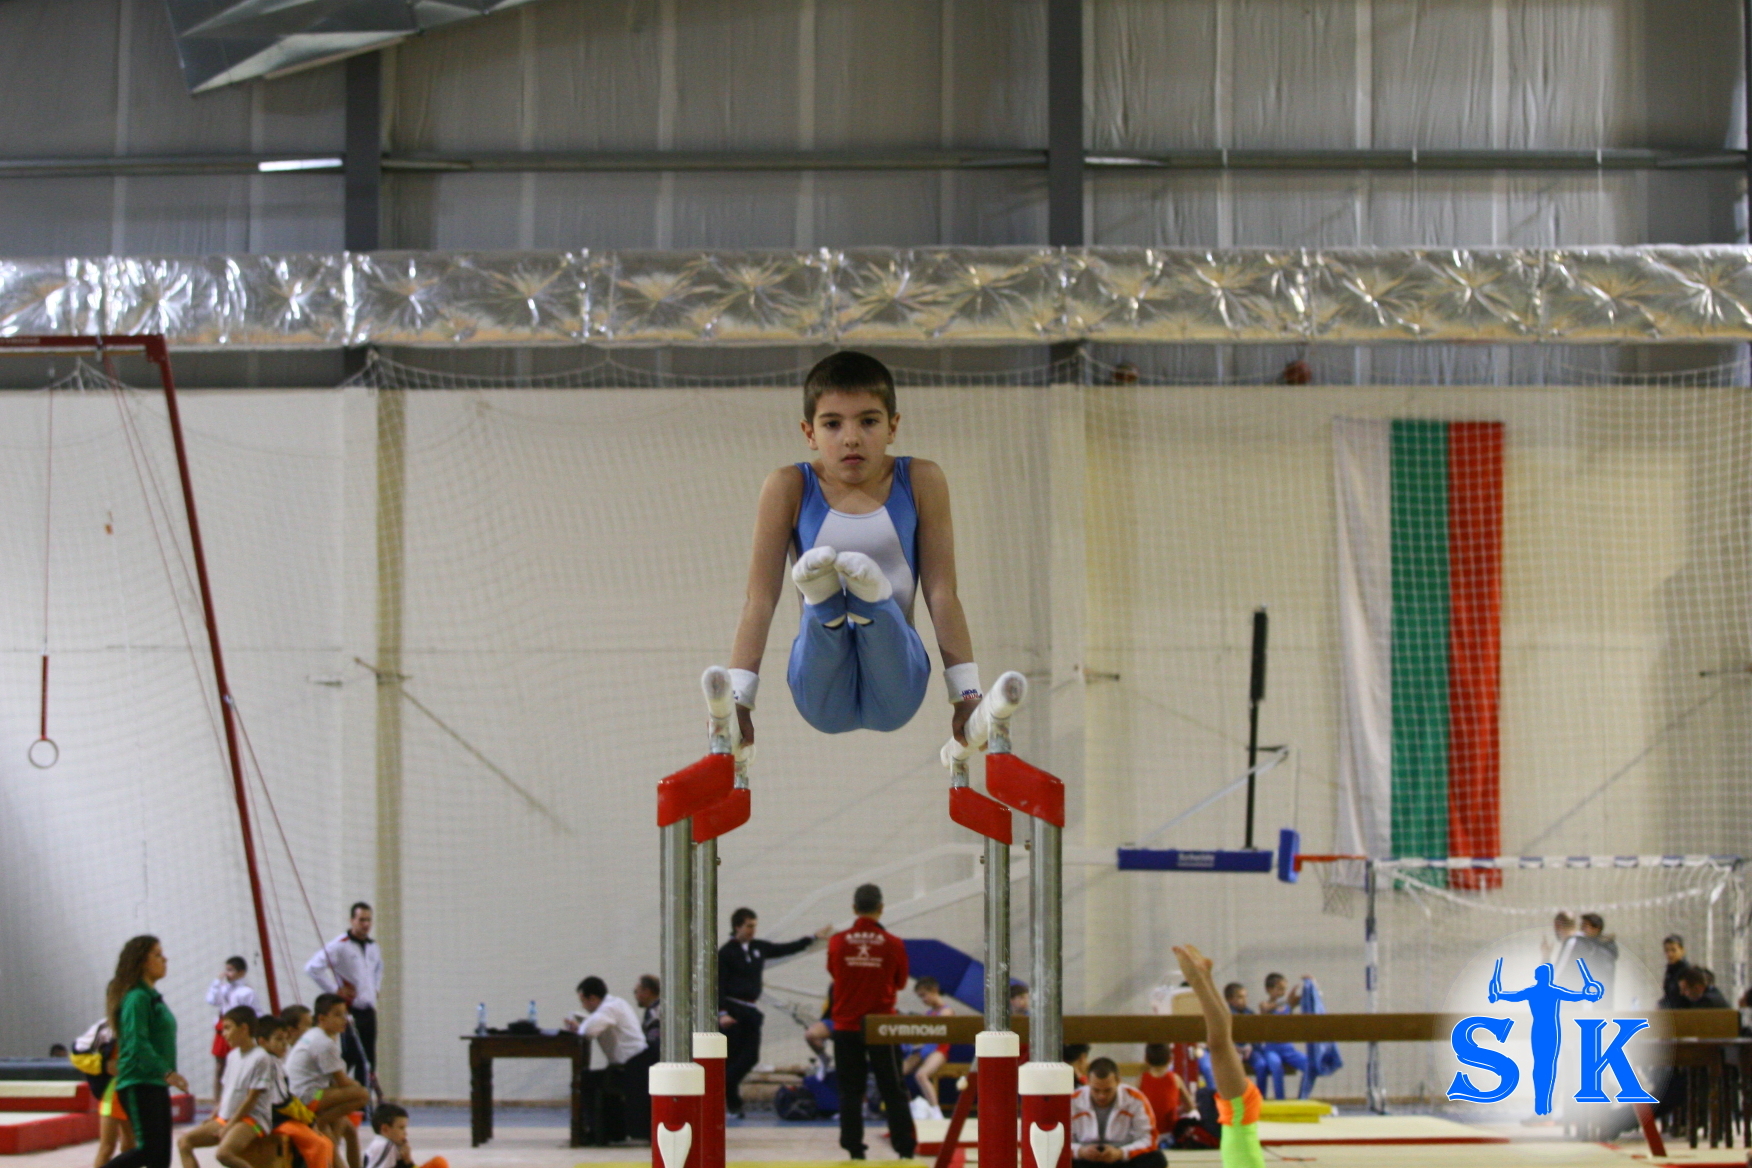 Bronze medalist on Parallel bars (David Shaumian)